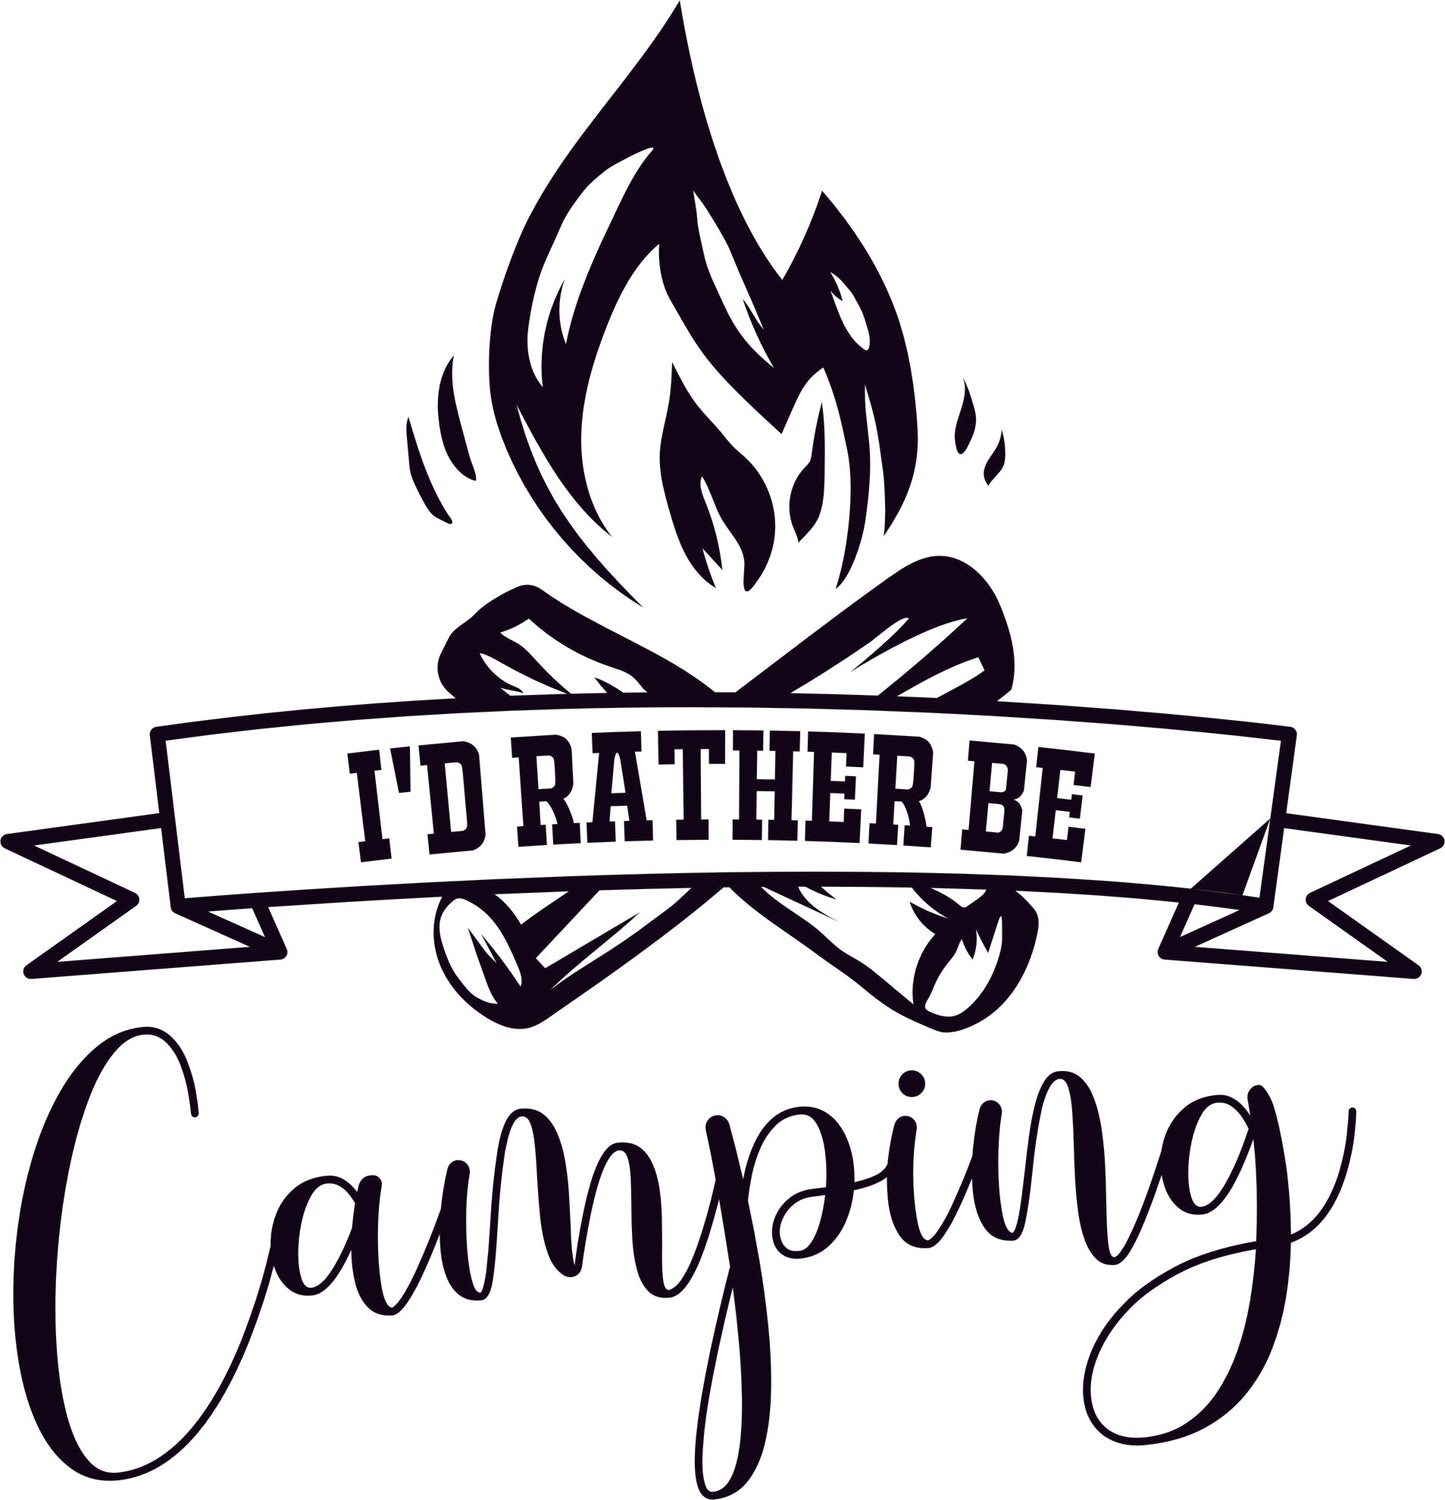 I'd rather be camping Vinyl Sticker Decal Graphic | RV Slide Decal RV Door Decal Travel Trailer Camper Truck